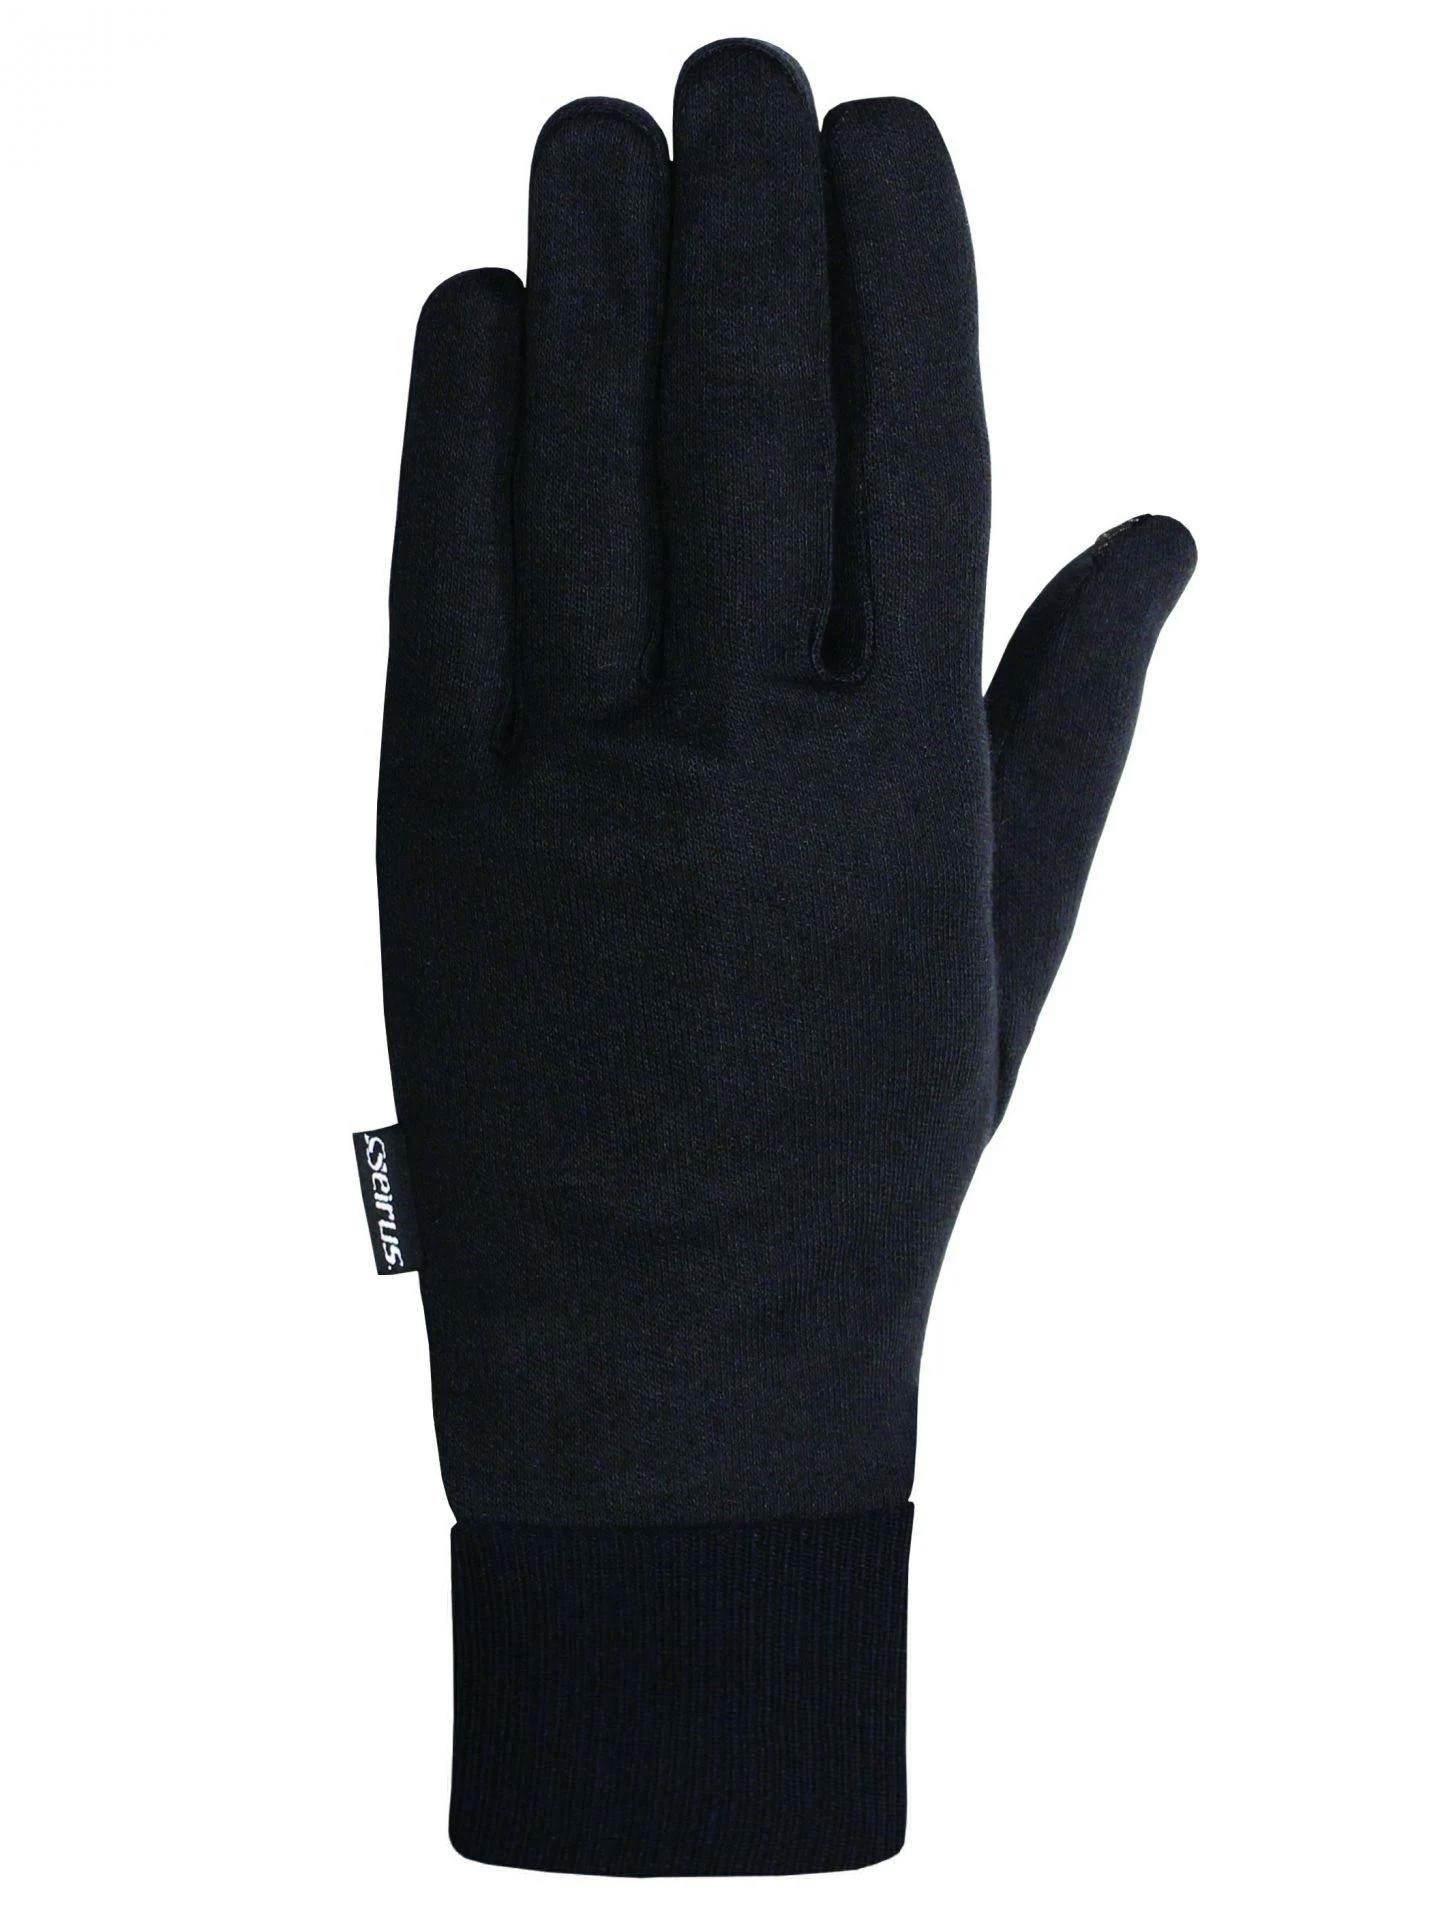 Seirus Thermax Deluxe Glove